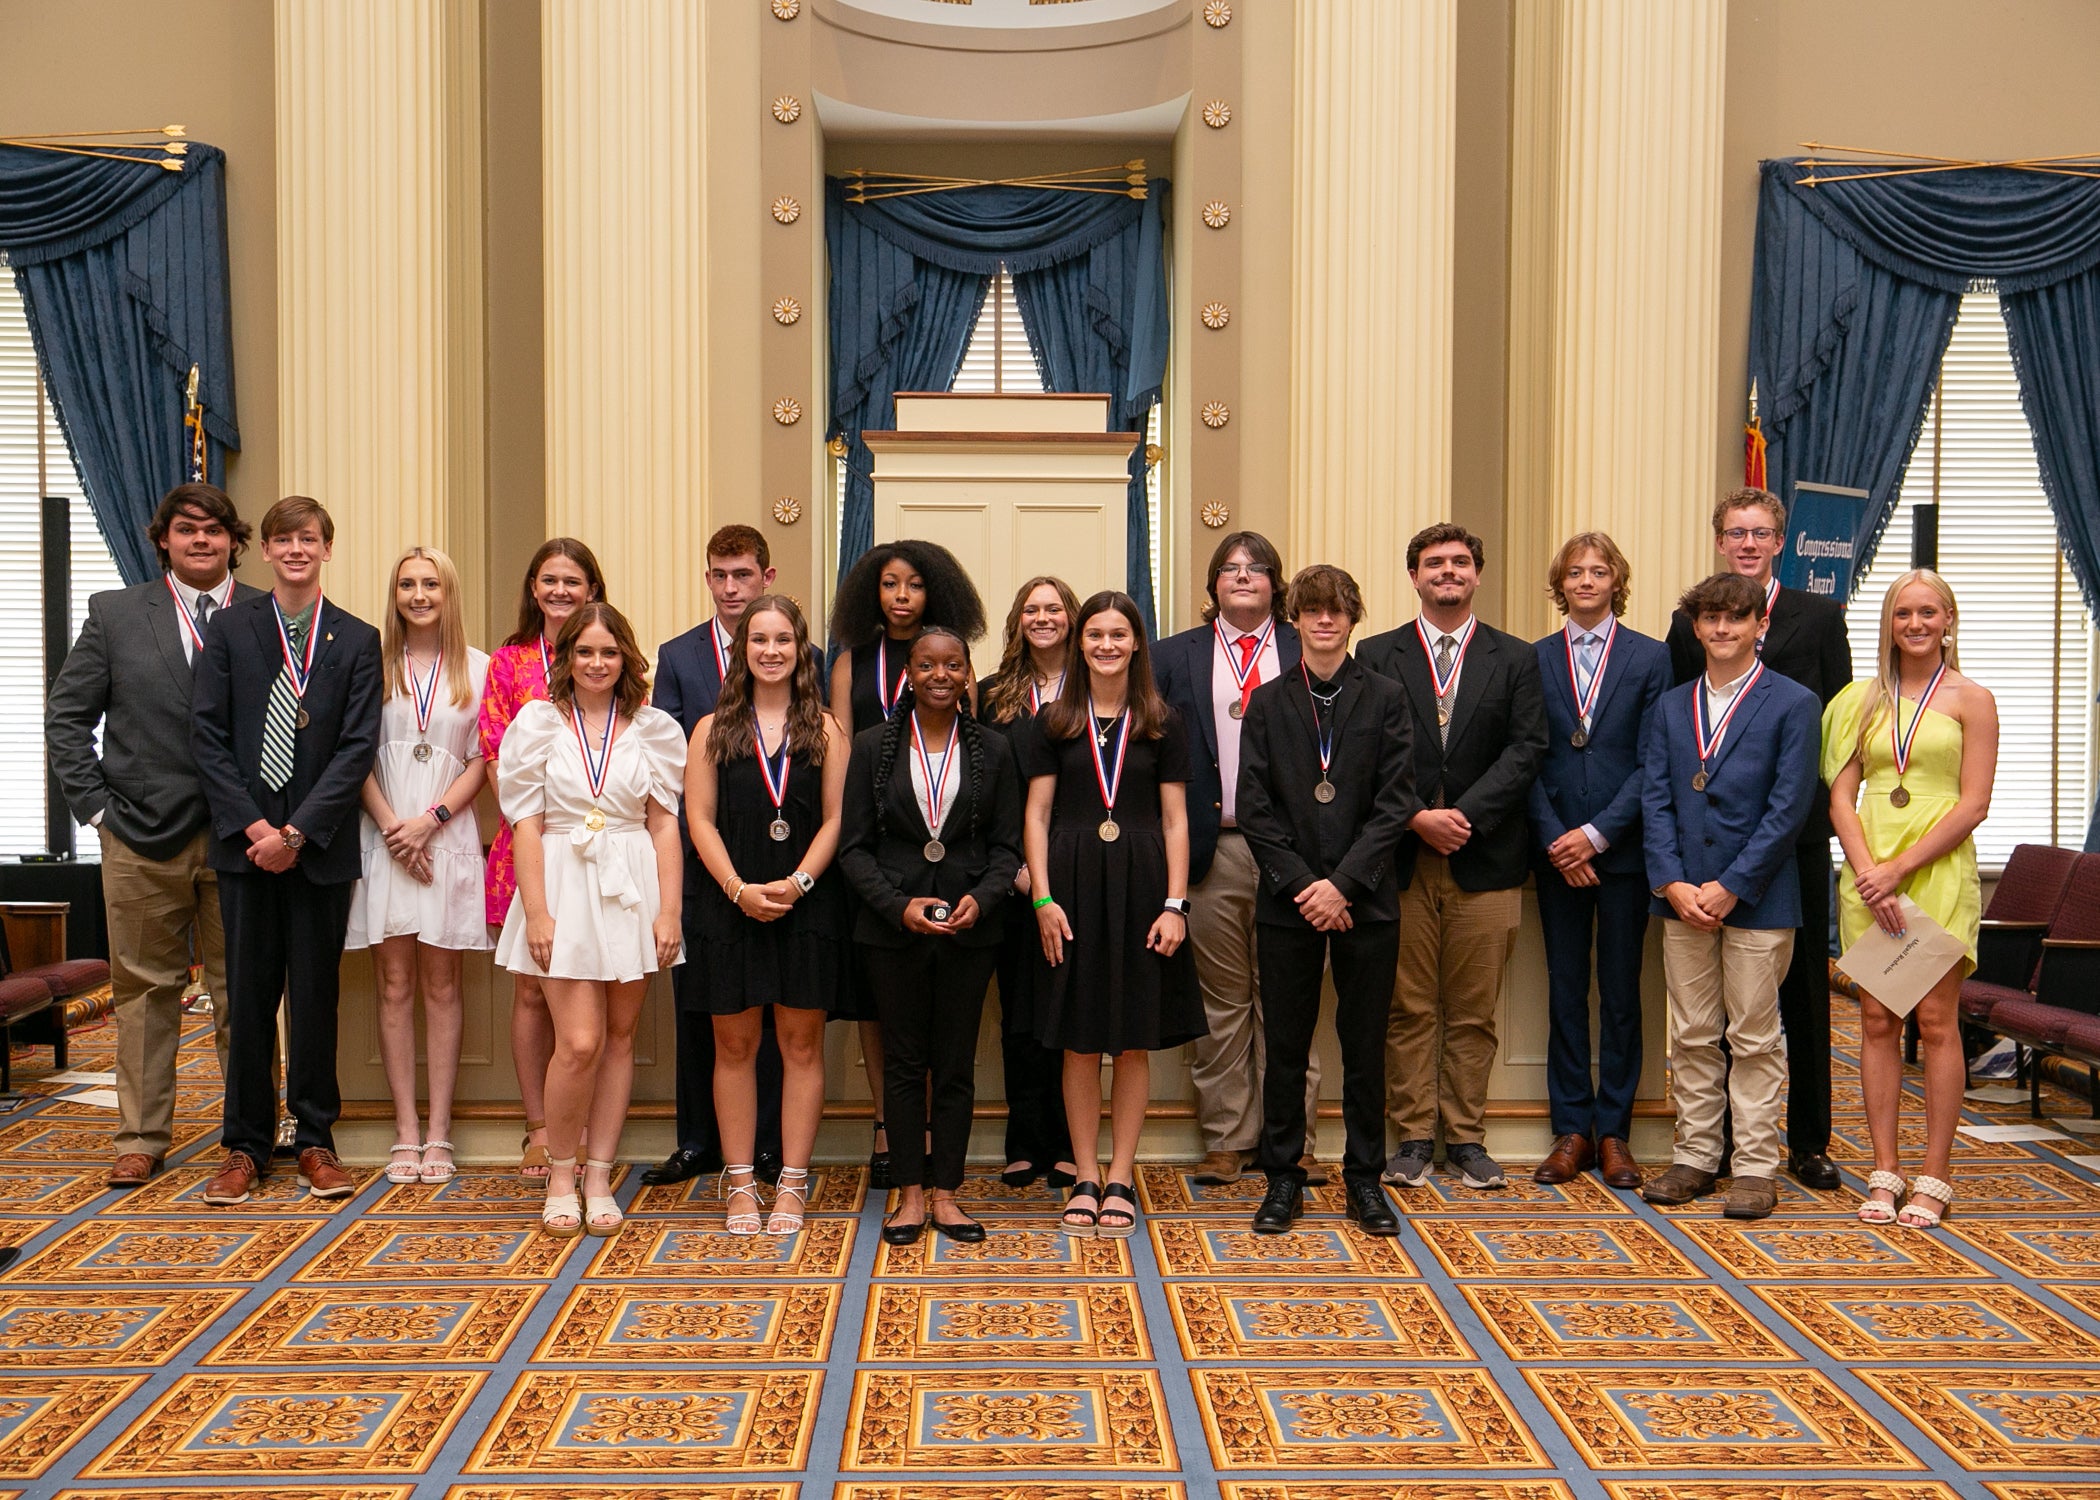 A group of Mississippi 4-H’ers pose for a group photo at the Congressional Awards ceremony.